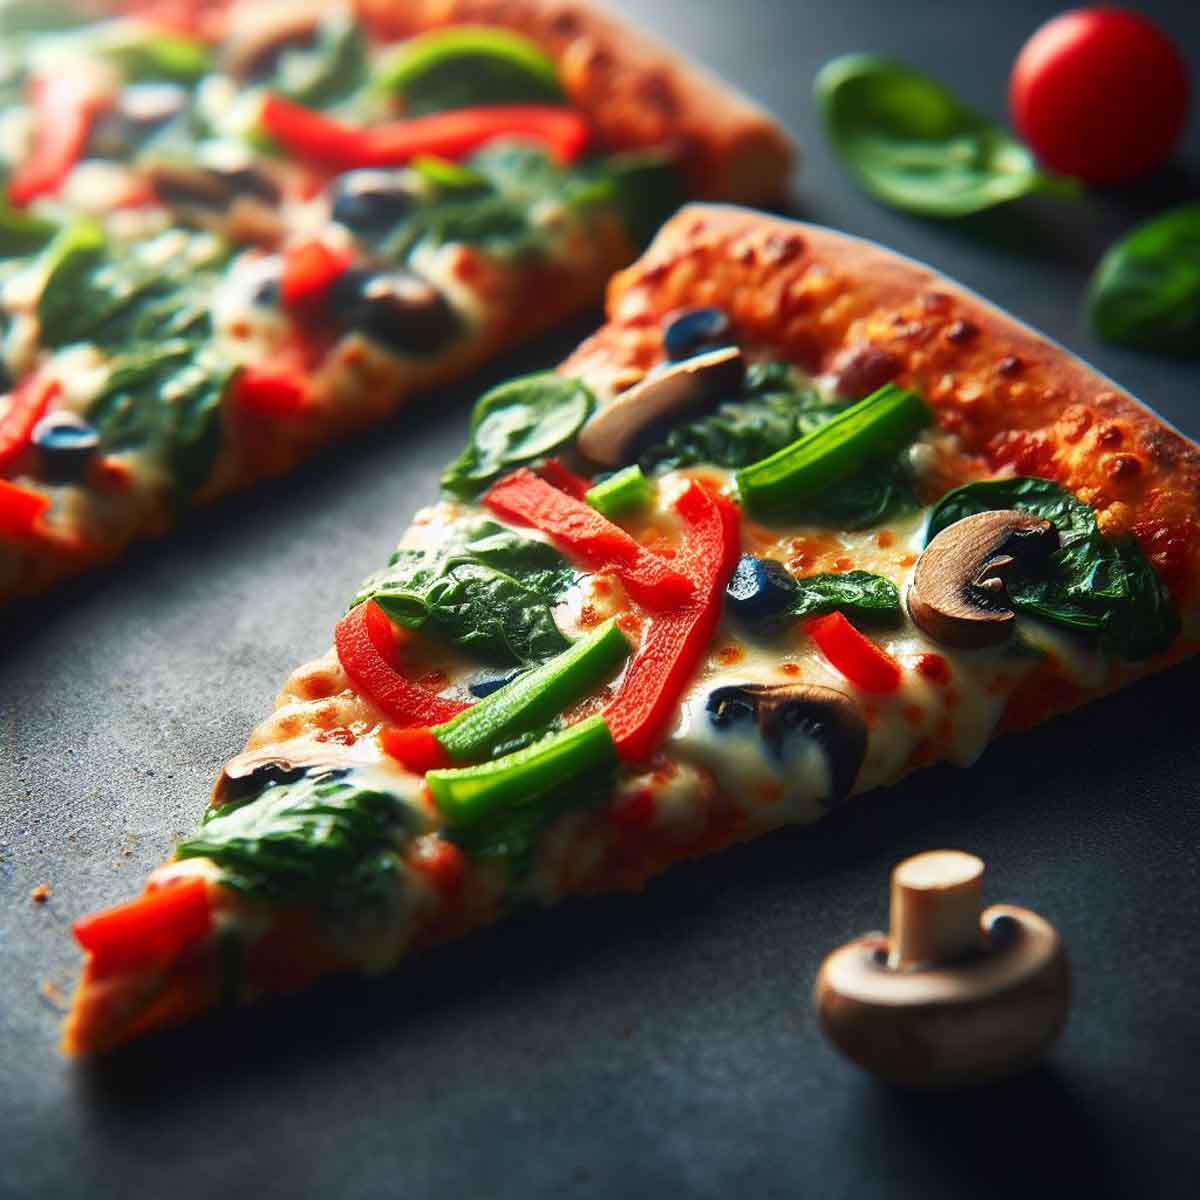 Close-up of a Domino's veggie pizza slice with vibrant toppings like spinach, red peppers, and mushrooms.